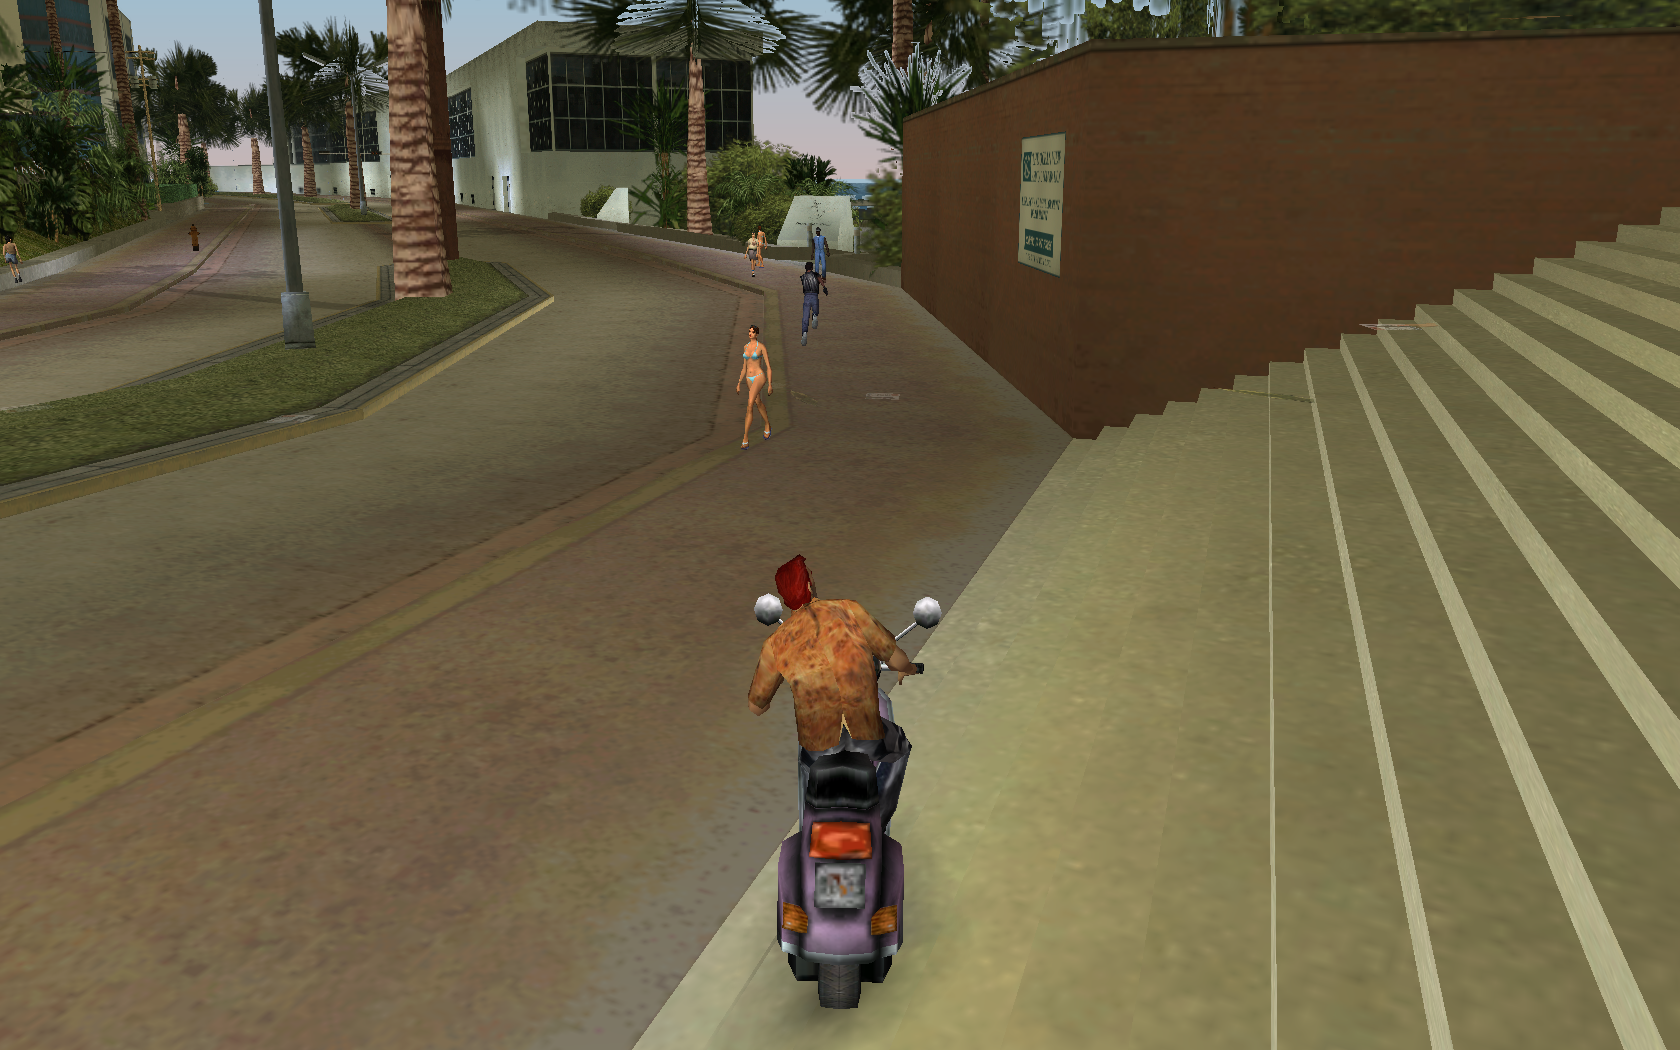 Skins for GTA Vice City with automatic installation: download free